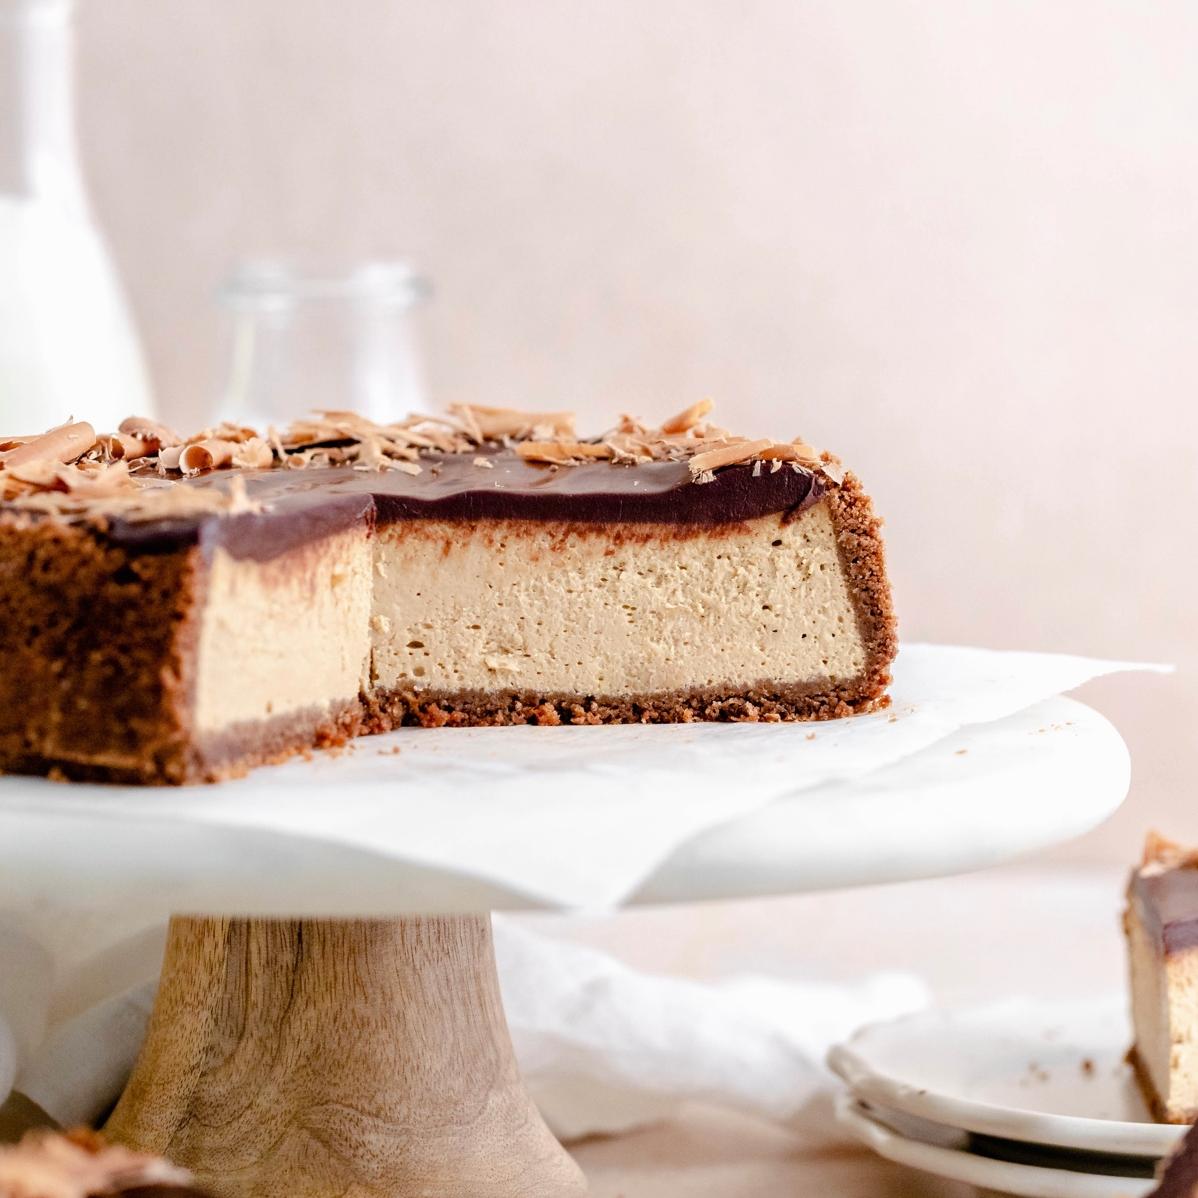  Satisfy your cravings for both coffee and chocolate in one delicious dessert.